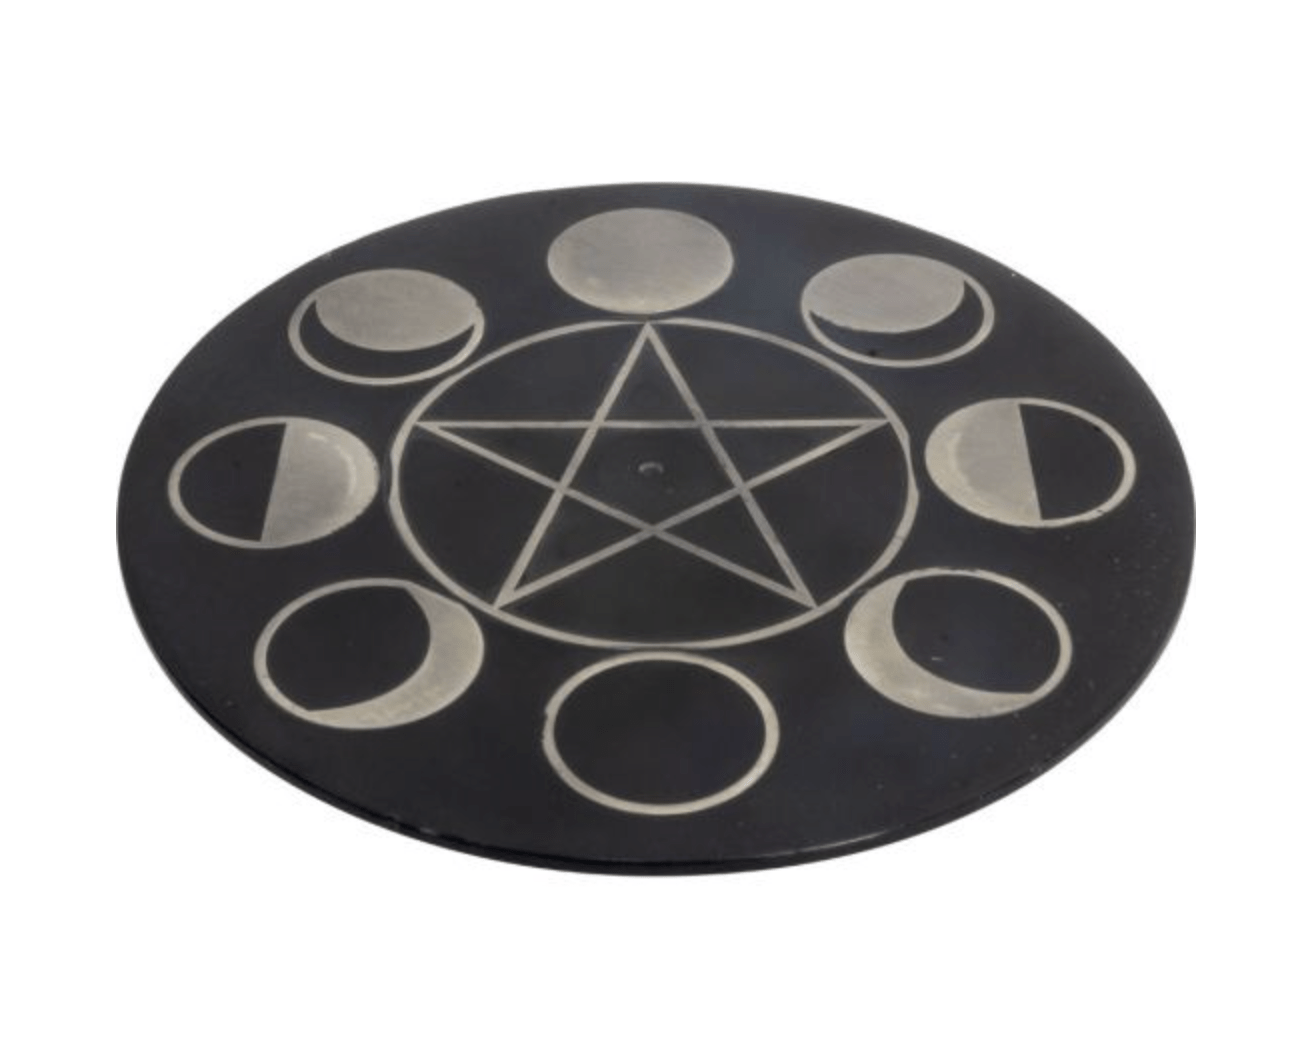 Soapstone Round Incense Holder w/ Silver Inlay | Moon Phases Pentacle - Spiral Circle